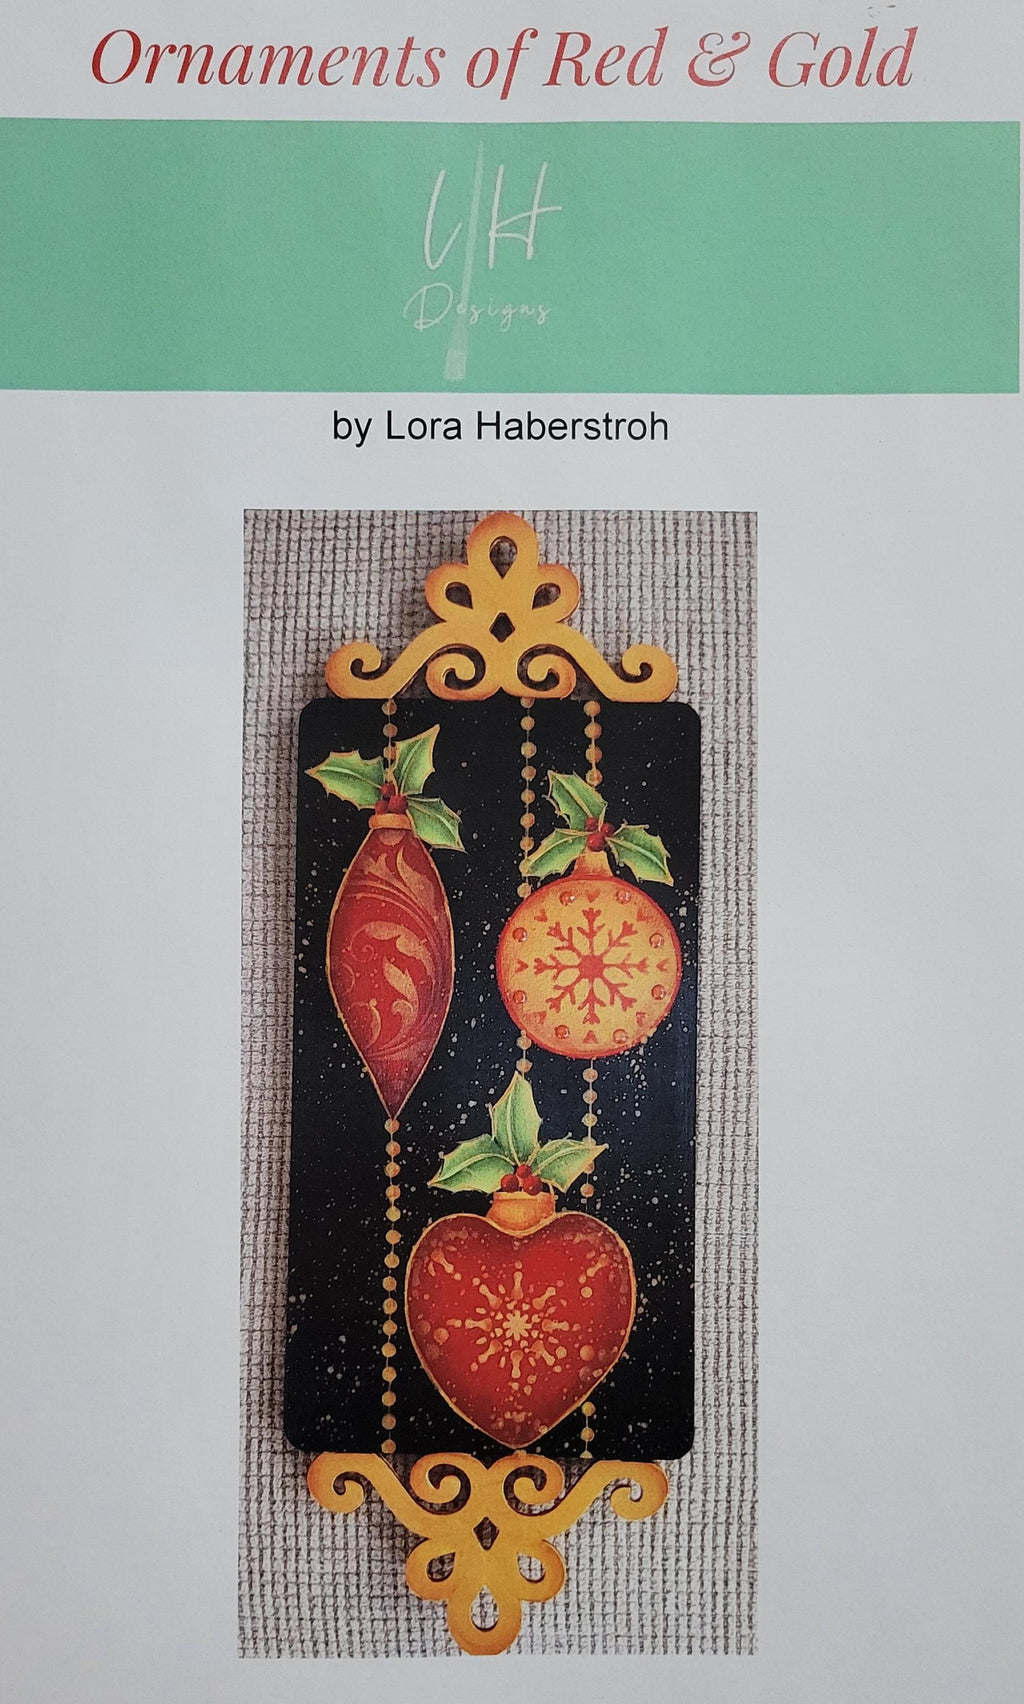 Ornaments of Red & Gold packet by Lora Haberstroh